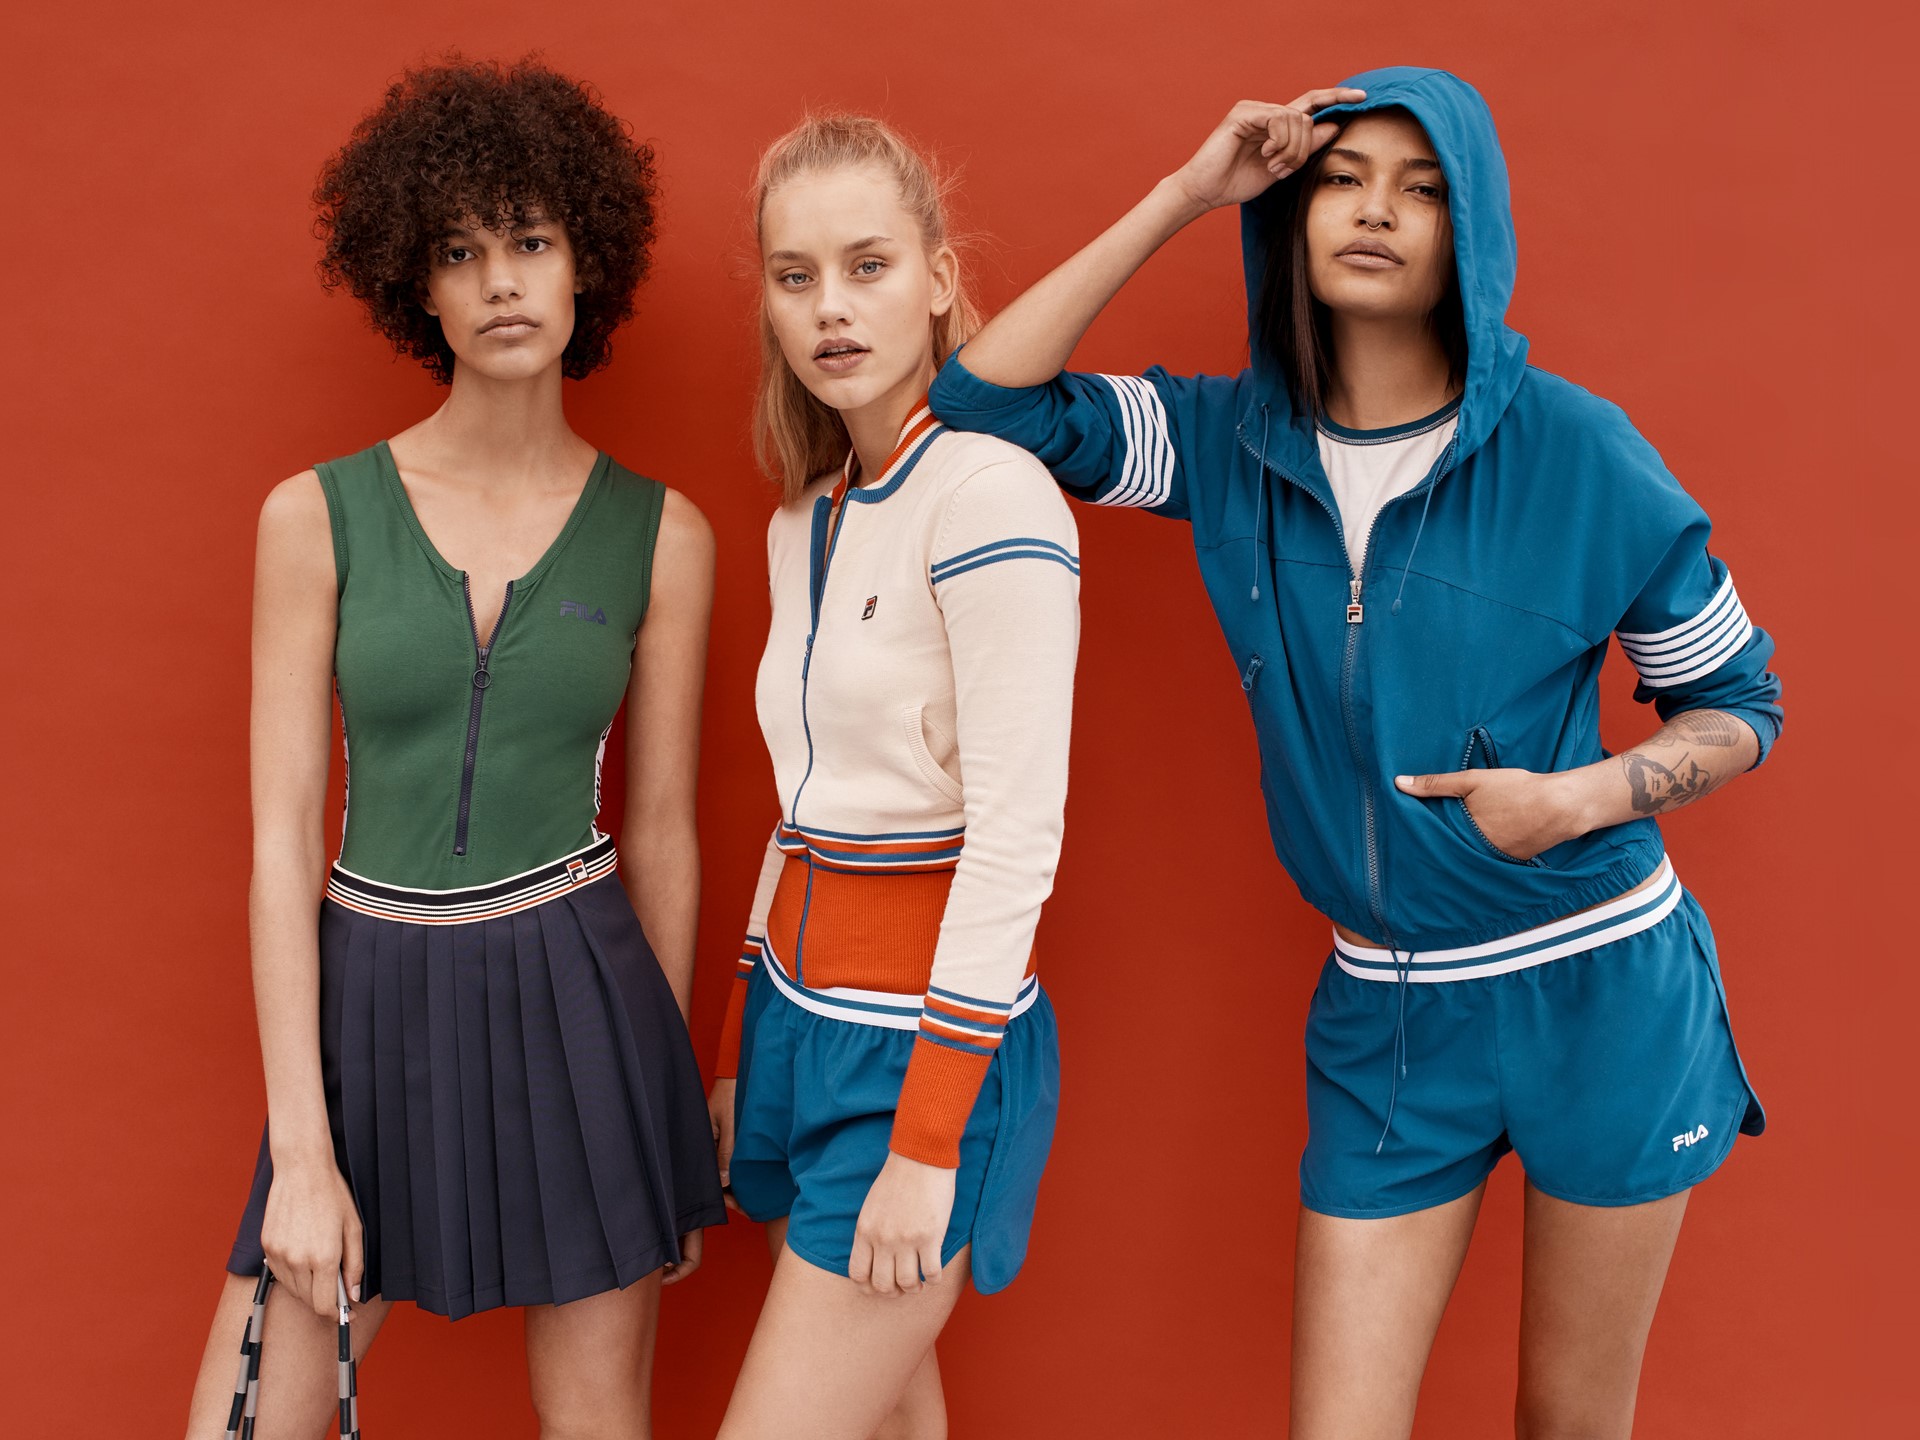 FILA and Urban Outfitters Launch New Collection Dual Gender Campaign